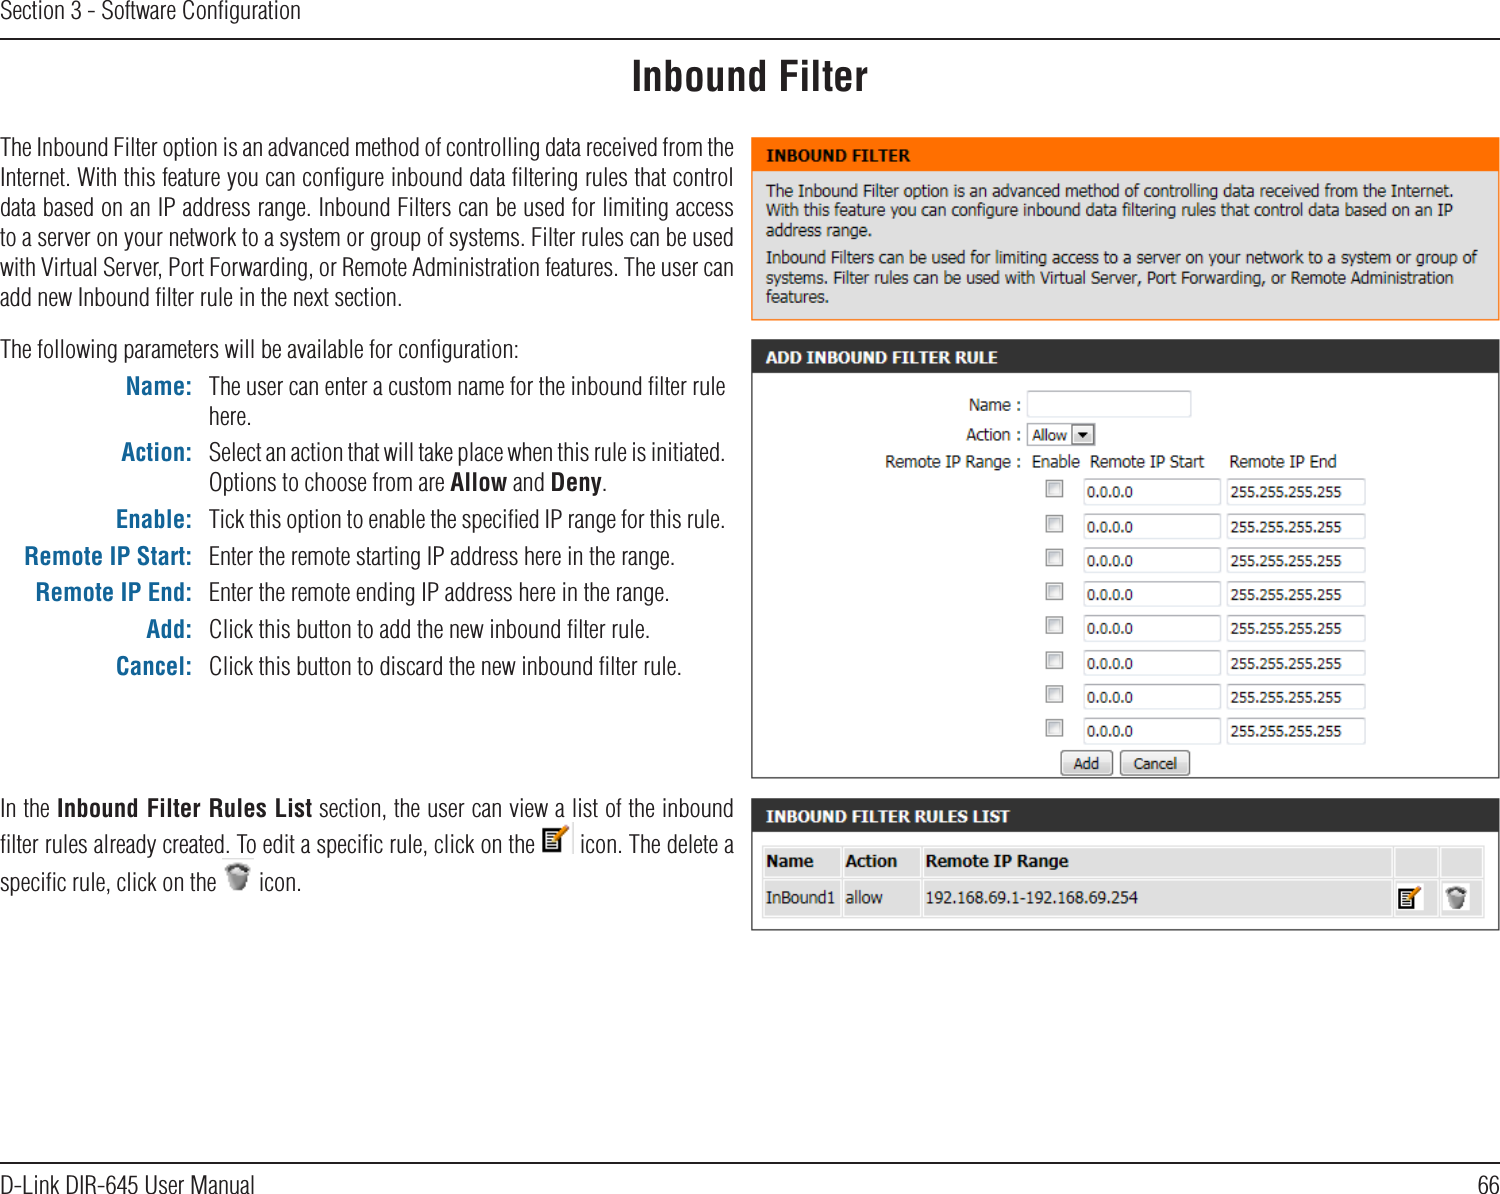 66D-Link DIR-645 User ManualSection 3 - Software ConﬁgurationInbound FilterThe Inbound Filter option is an advanced method of controlling data received from the Internet. With this feature you can conﬁgure inbound data ﬁltering rules that control data based on an IP address range. Inbound Filters can be used for limiting access to a server on your network to a system or group of systems. Filter rules can be used with Virtual Server, Port Forwarding, or Remote Administration features. The user can add new Inbound ﬁlter rule in the next section.The following parameters will be available for conﬁguration:Name: The user can enter a custom name for the inbound ﬁlter rule here.Action: Select an action that will take place when this rule is initiated. Options to choose from are Allow and Deny.Enable: Tick this option to enable the speciﬁed IP range for this rule.Remote IP Start: Enter the remote starting IP address here in the range.Remote IP End: Enter the remote ending IP address here in the range.Add: Click this button to add the new inbound ﬁlter rule.Cancel: Click this button to discard the new inbound ﬁlter rule.In the Inbound Filter Rules List section, the user can view a list of the inbound ﬁlter rules already created. To edit a speciﬁc rule, click on the   icon. The delete a speciﬁc rule, click on the   icon.